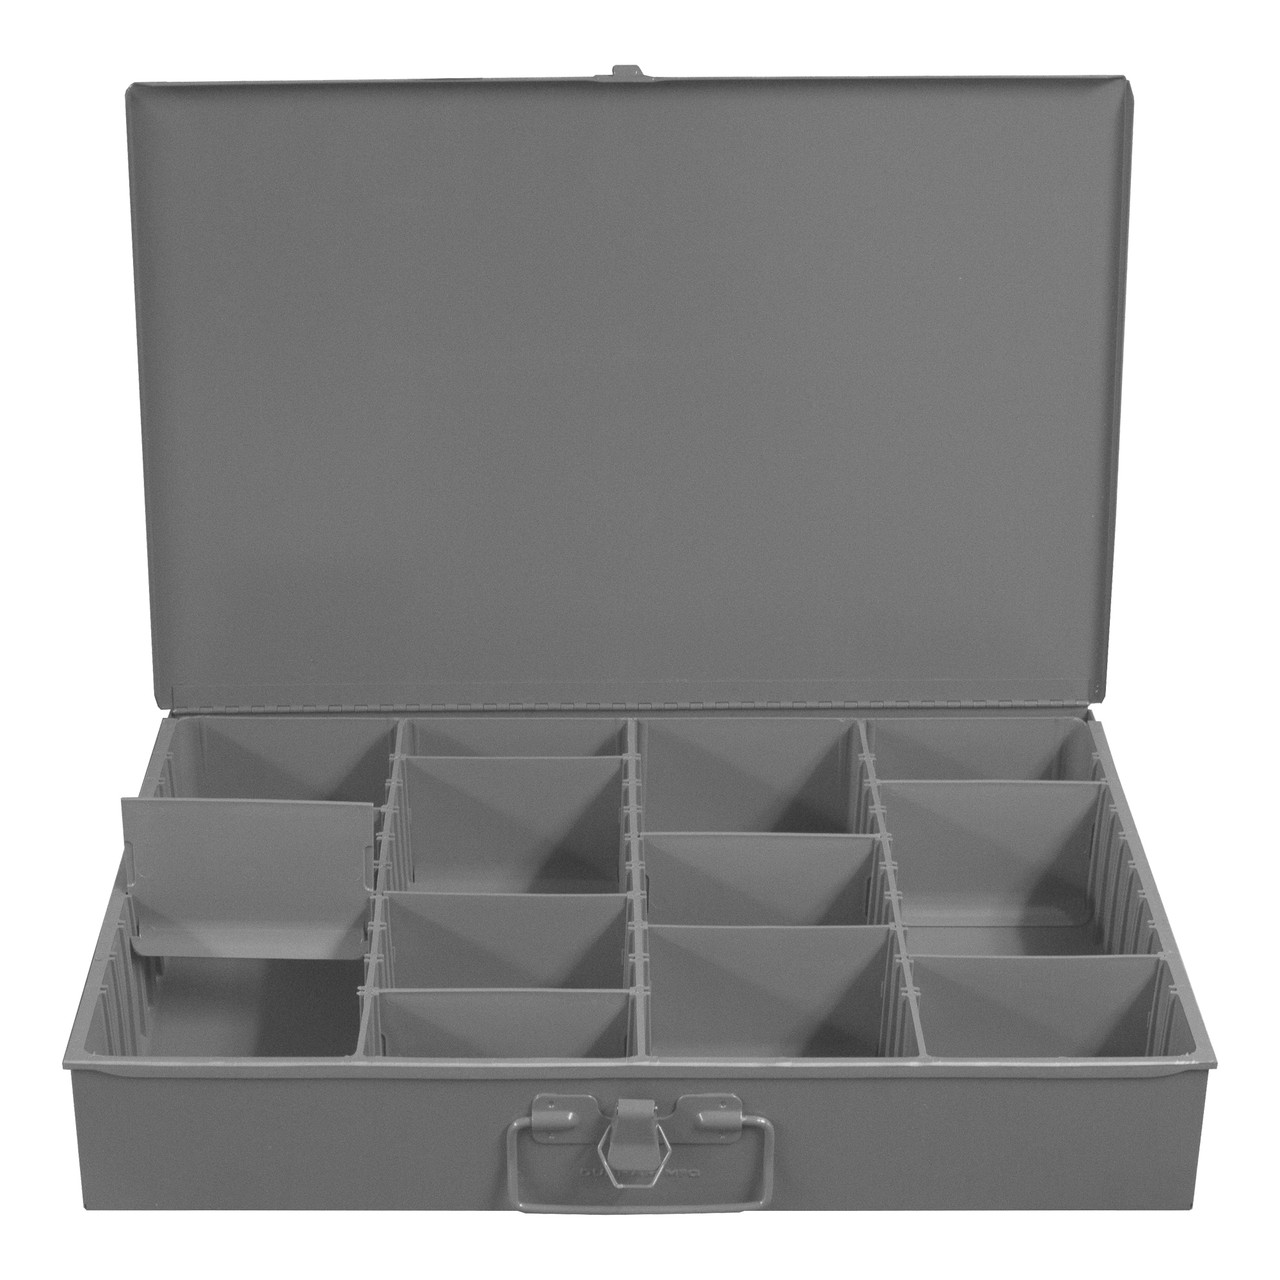 Durham 119-95 Vertical Compartment Box - Pack of 4 - Western Safety